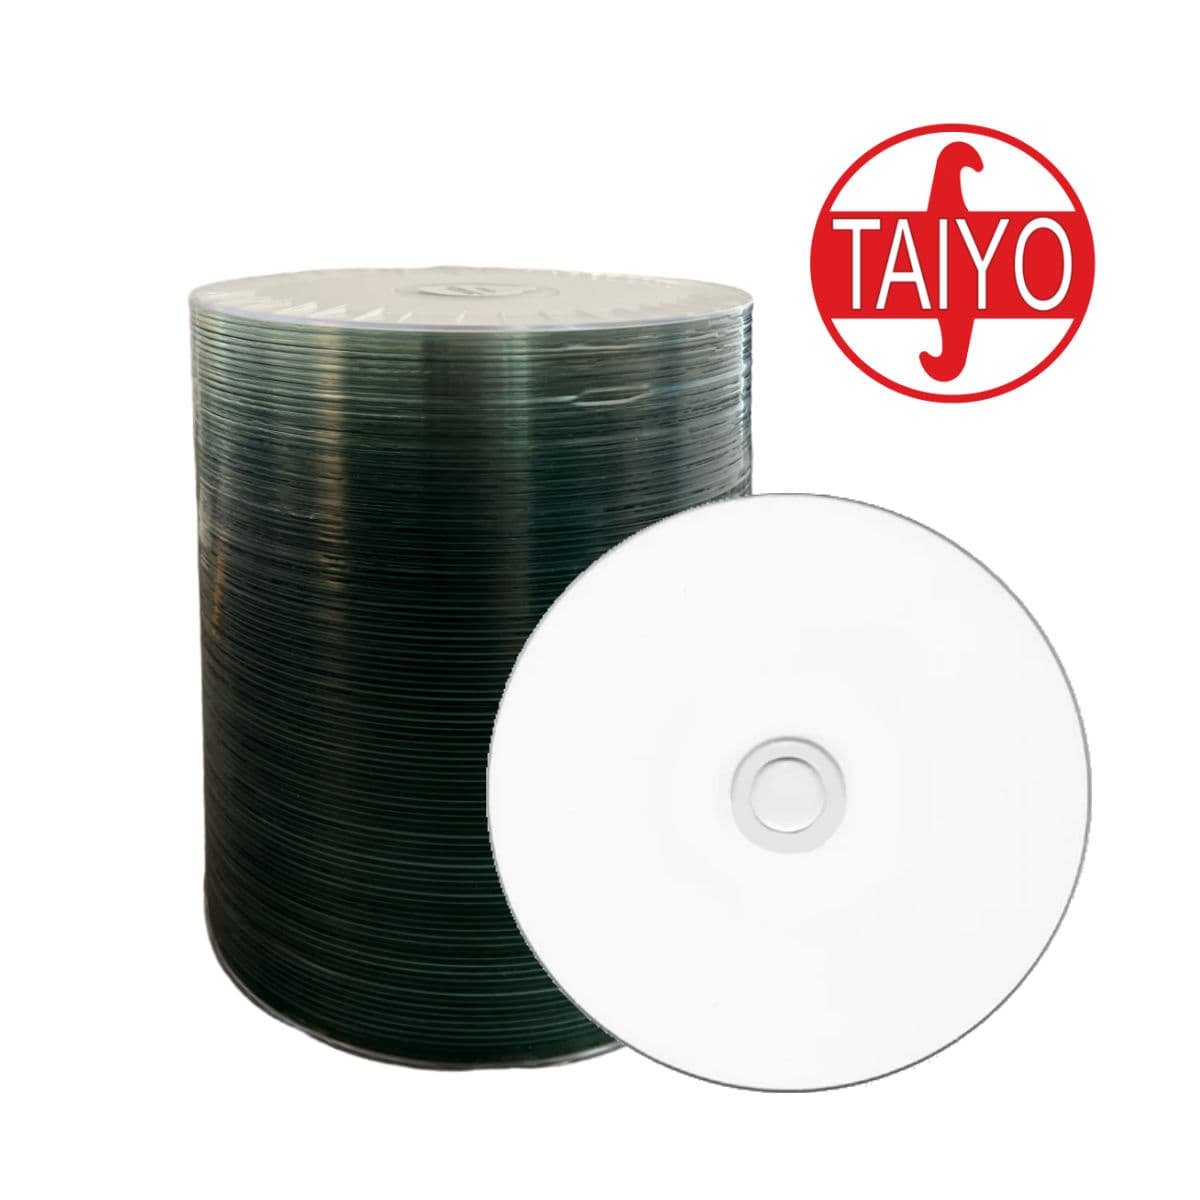 taiyo-yuden-by-cmc-pro-value-edition-cd-r-700-mb-voll